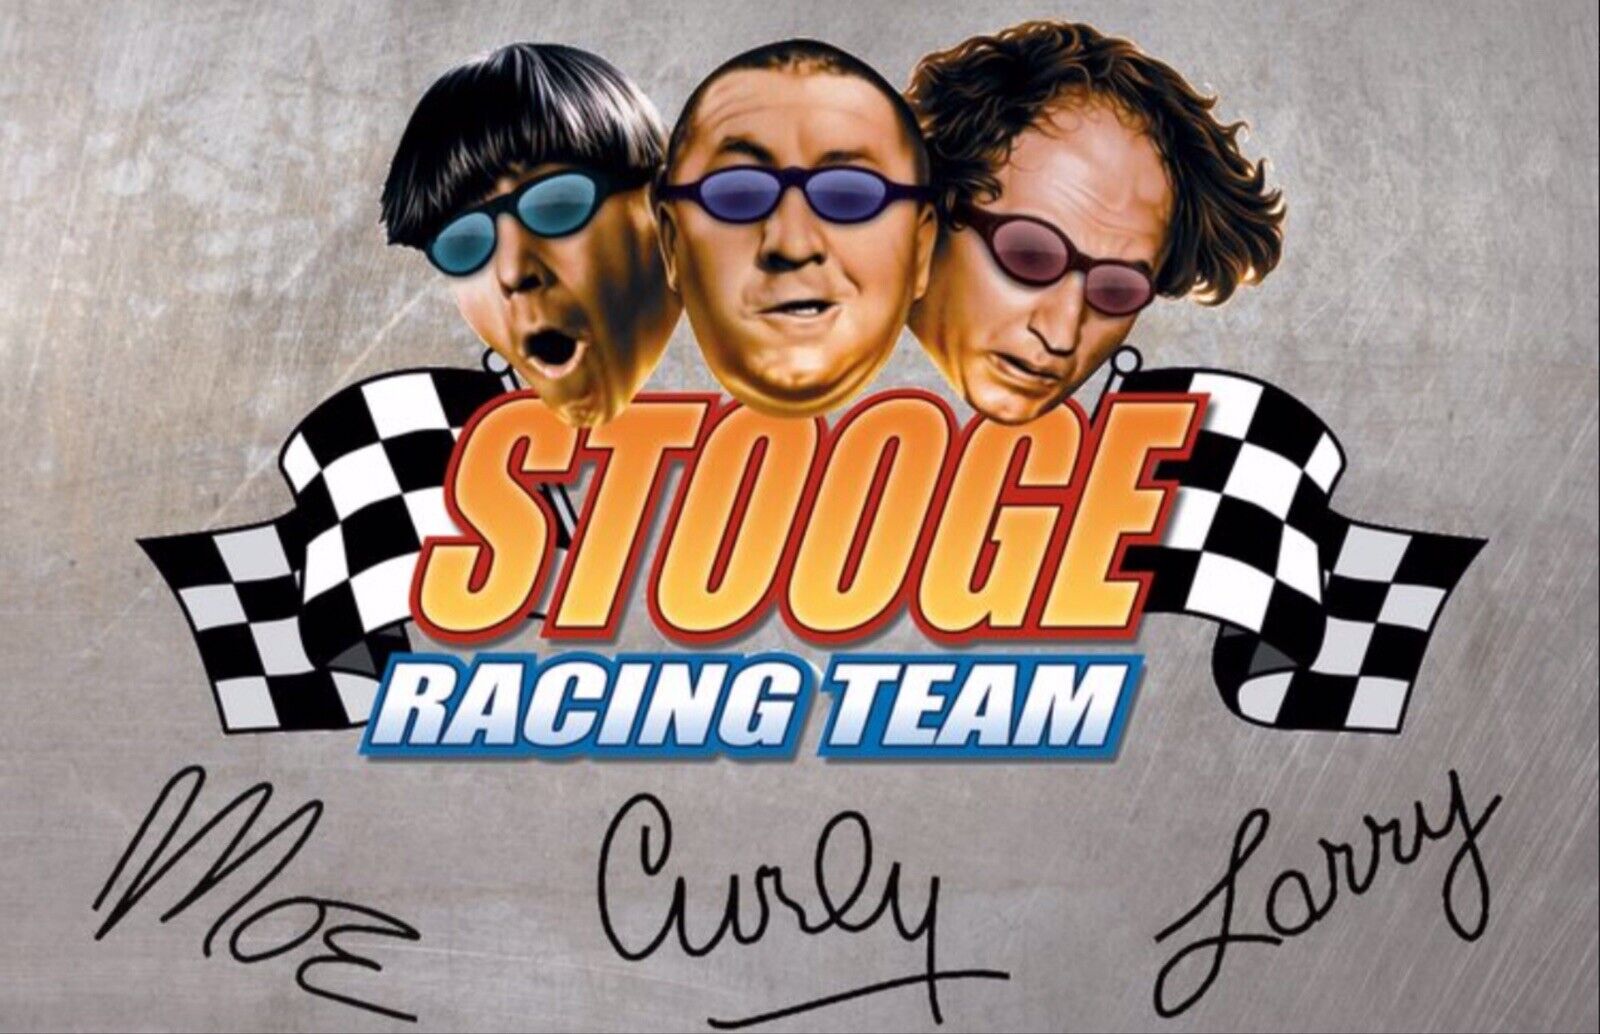 Three Stooges Racing Team on a 3.5” X 2.5” Refrigerator Magnet